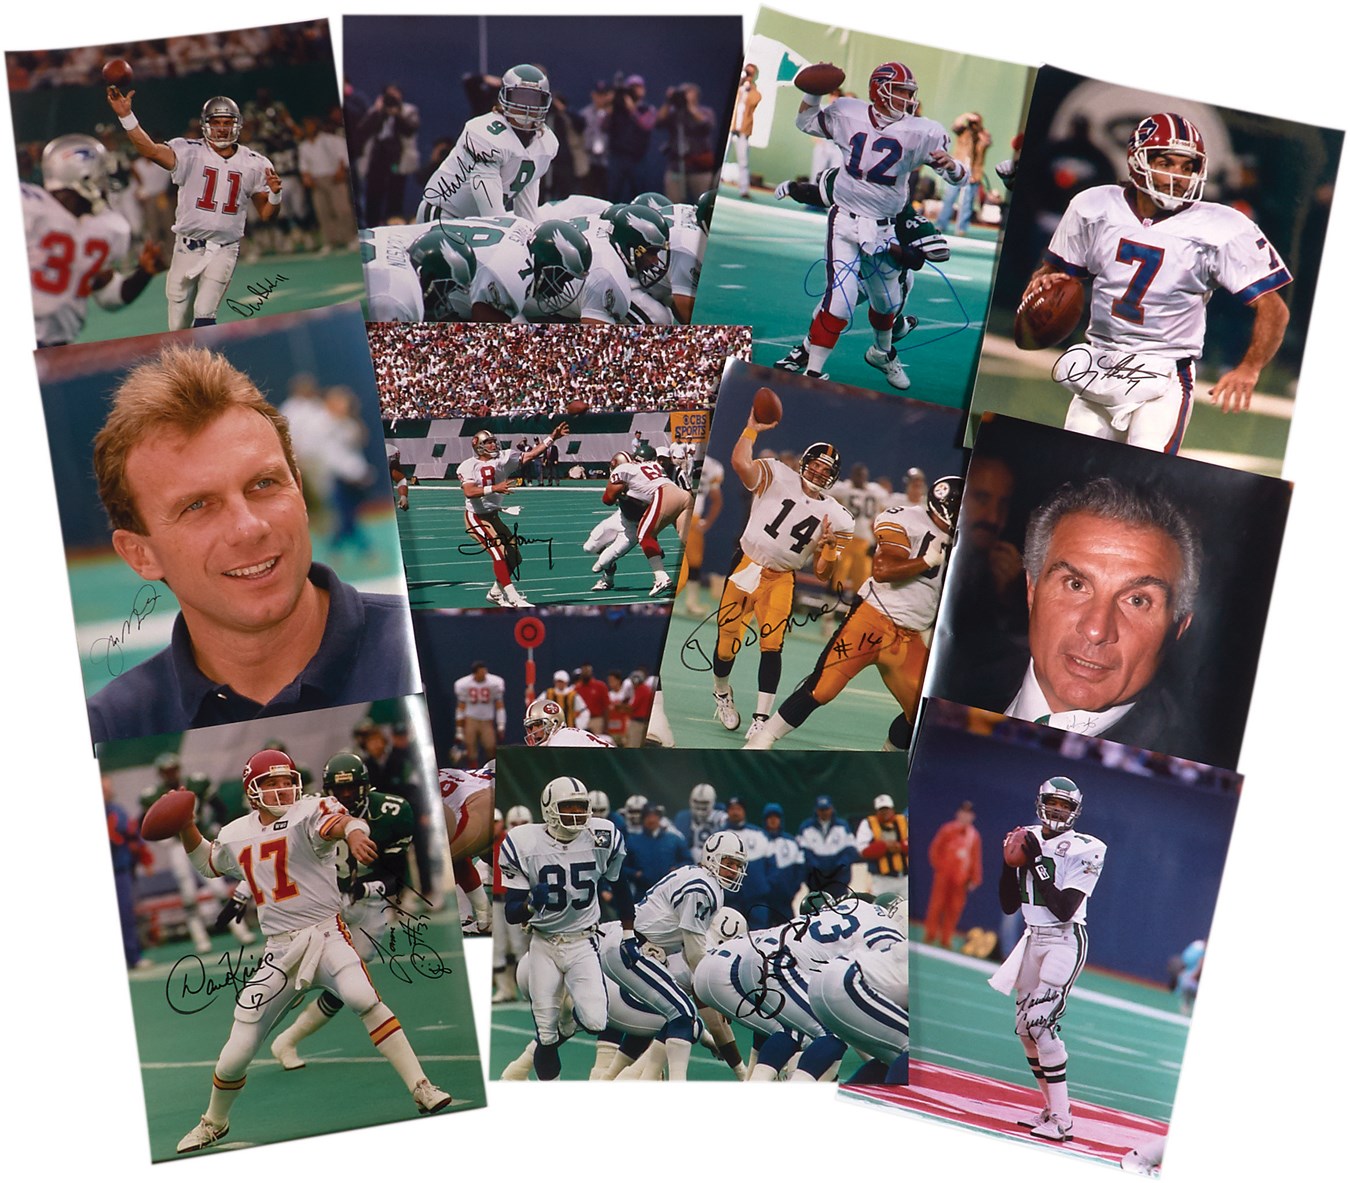 Football - 1980s-90s "NFL Quarterbacks" 16x20” In Person Signed Photographs from VIP Photographer Richard Brightly (12)